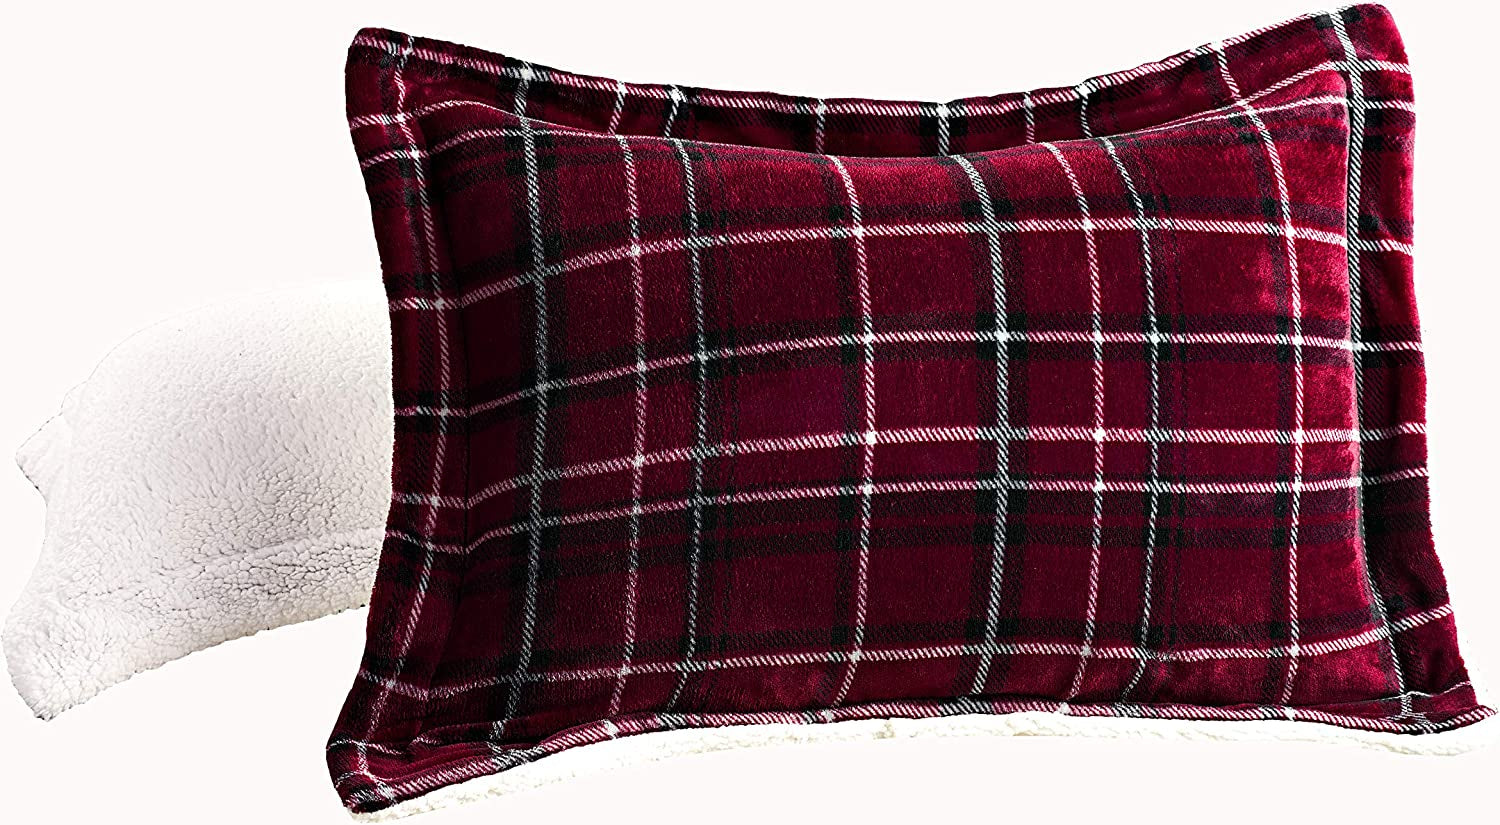 Softest, Coziest Heavy Weight Plaid Pattern Micromink Sherpa-Backing Premium Quality down down Alternative Micro-Suede 3-Piece Reversible Comforter Set, King/Cal King, Burgundy